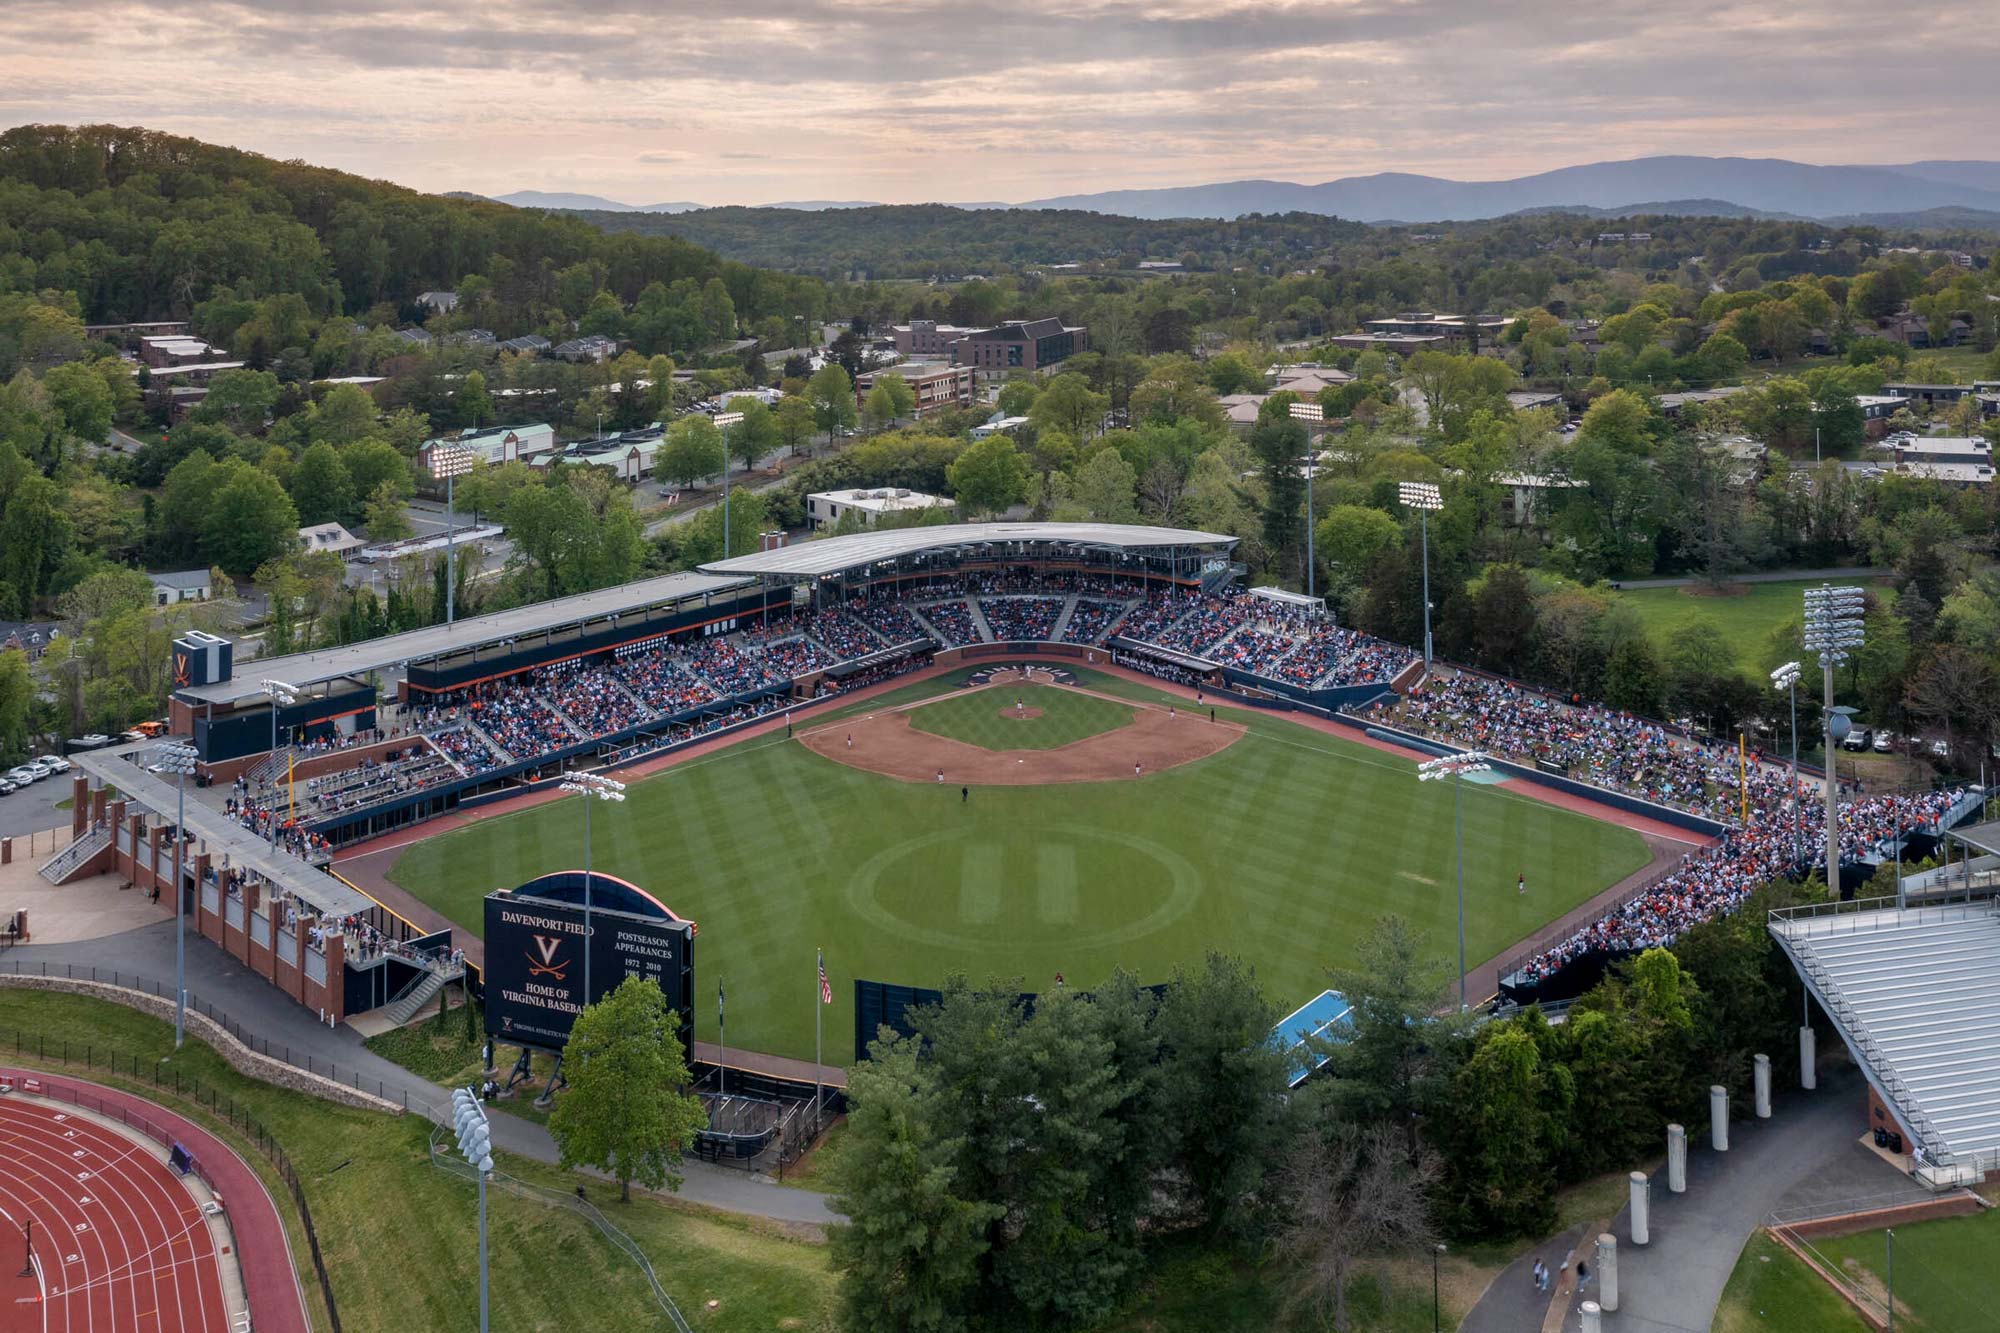 An aerial shot of the UVA baseball field, with the number 11 mowed into the grass